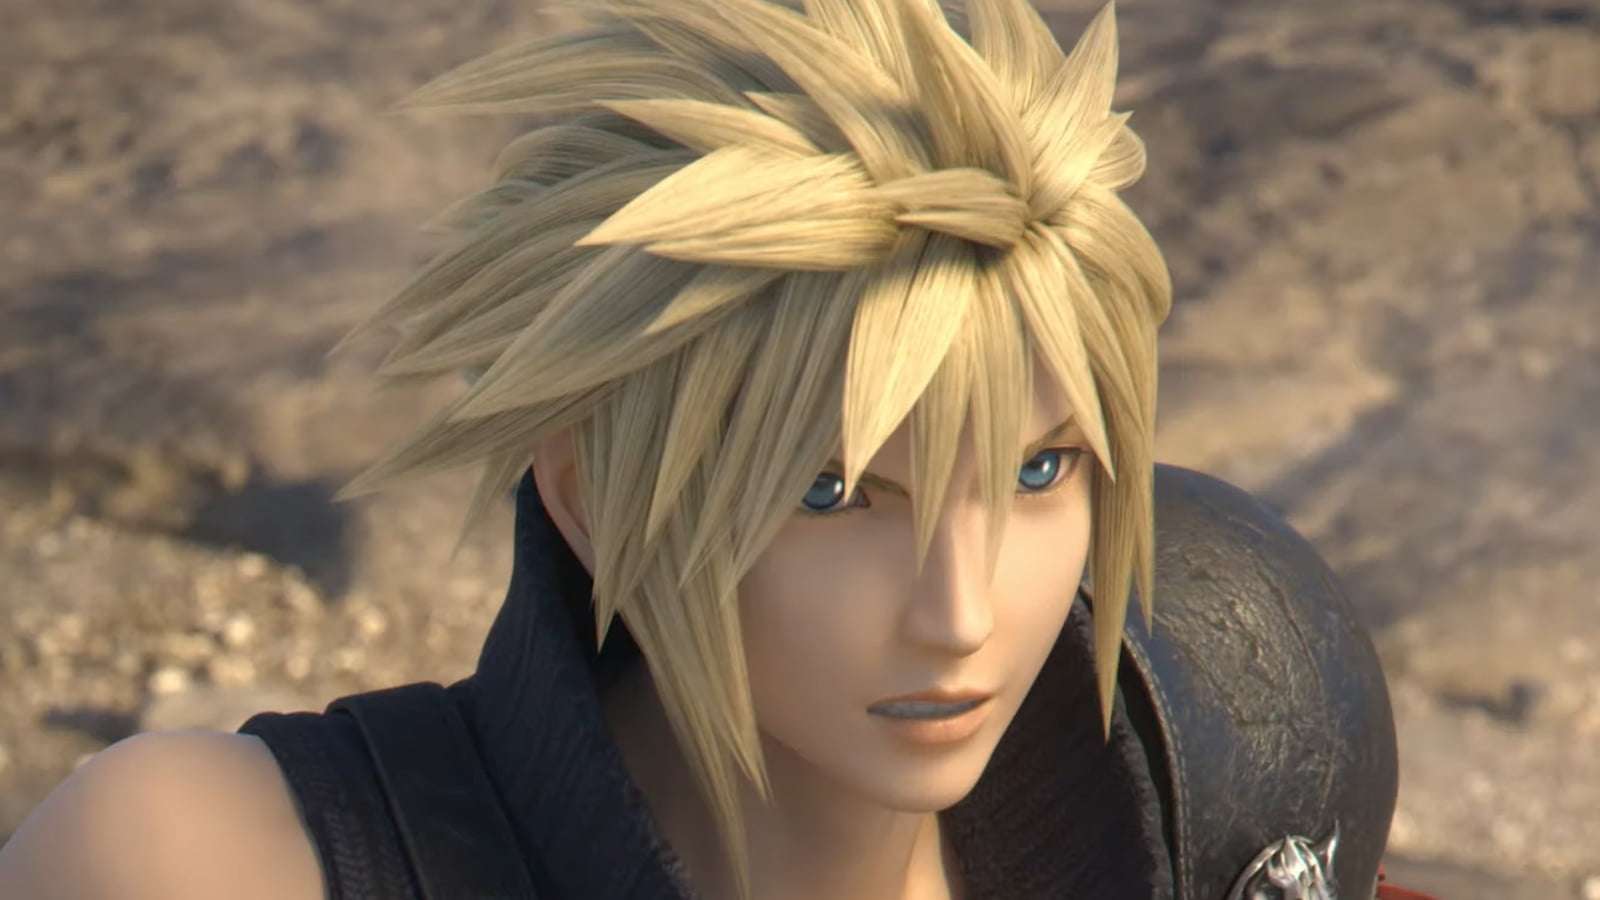 Development footage of Cloud from Sephiroth's trailer for Super Smash Bros. Ultimate